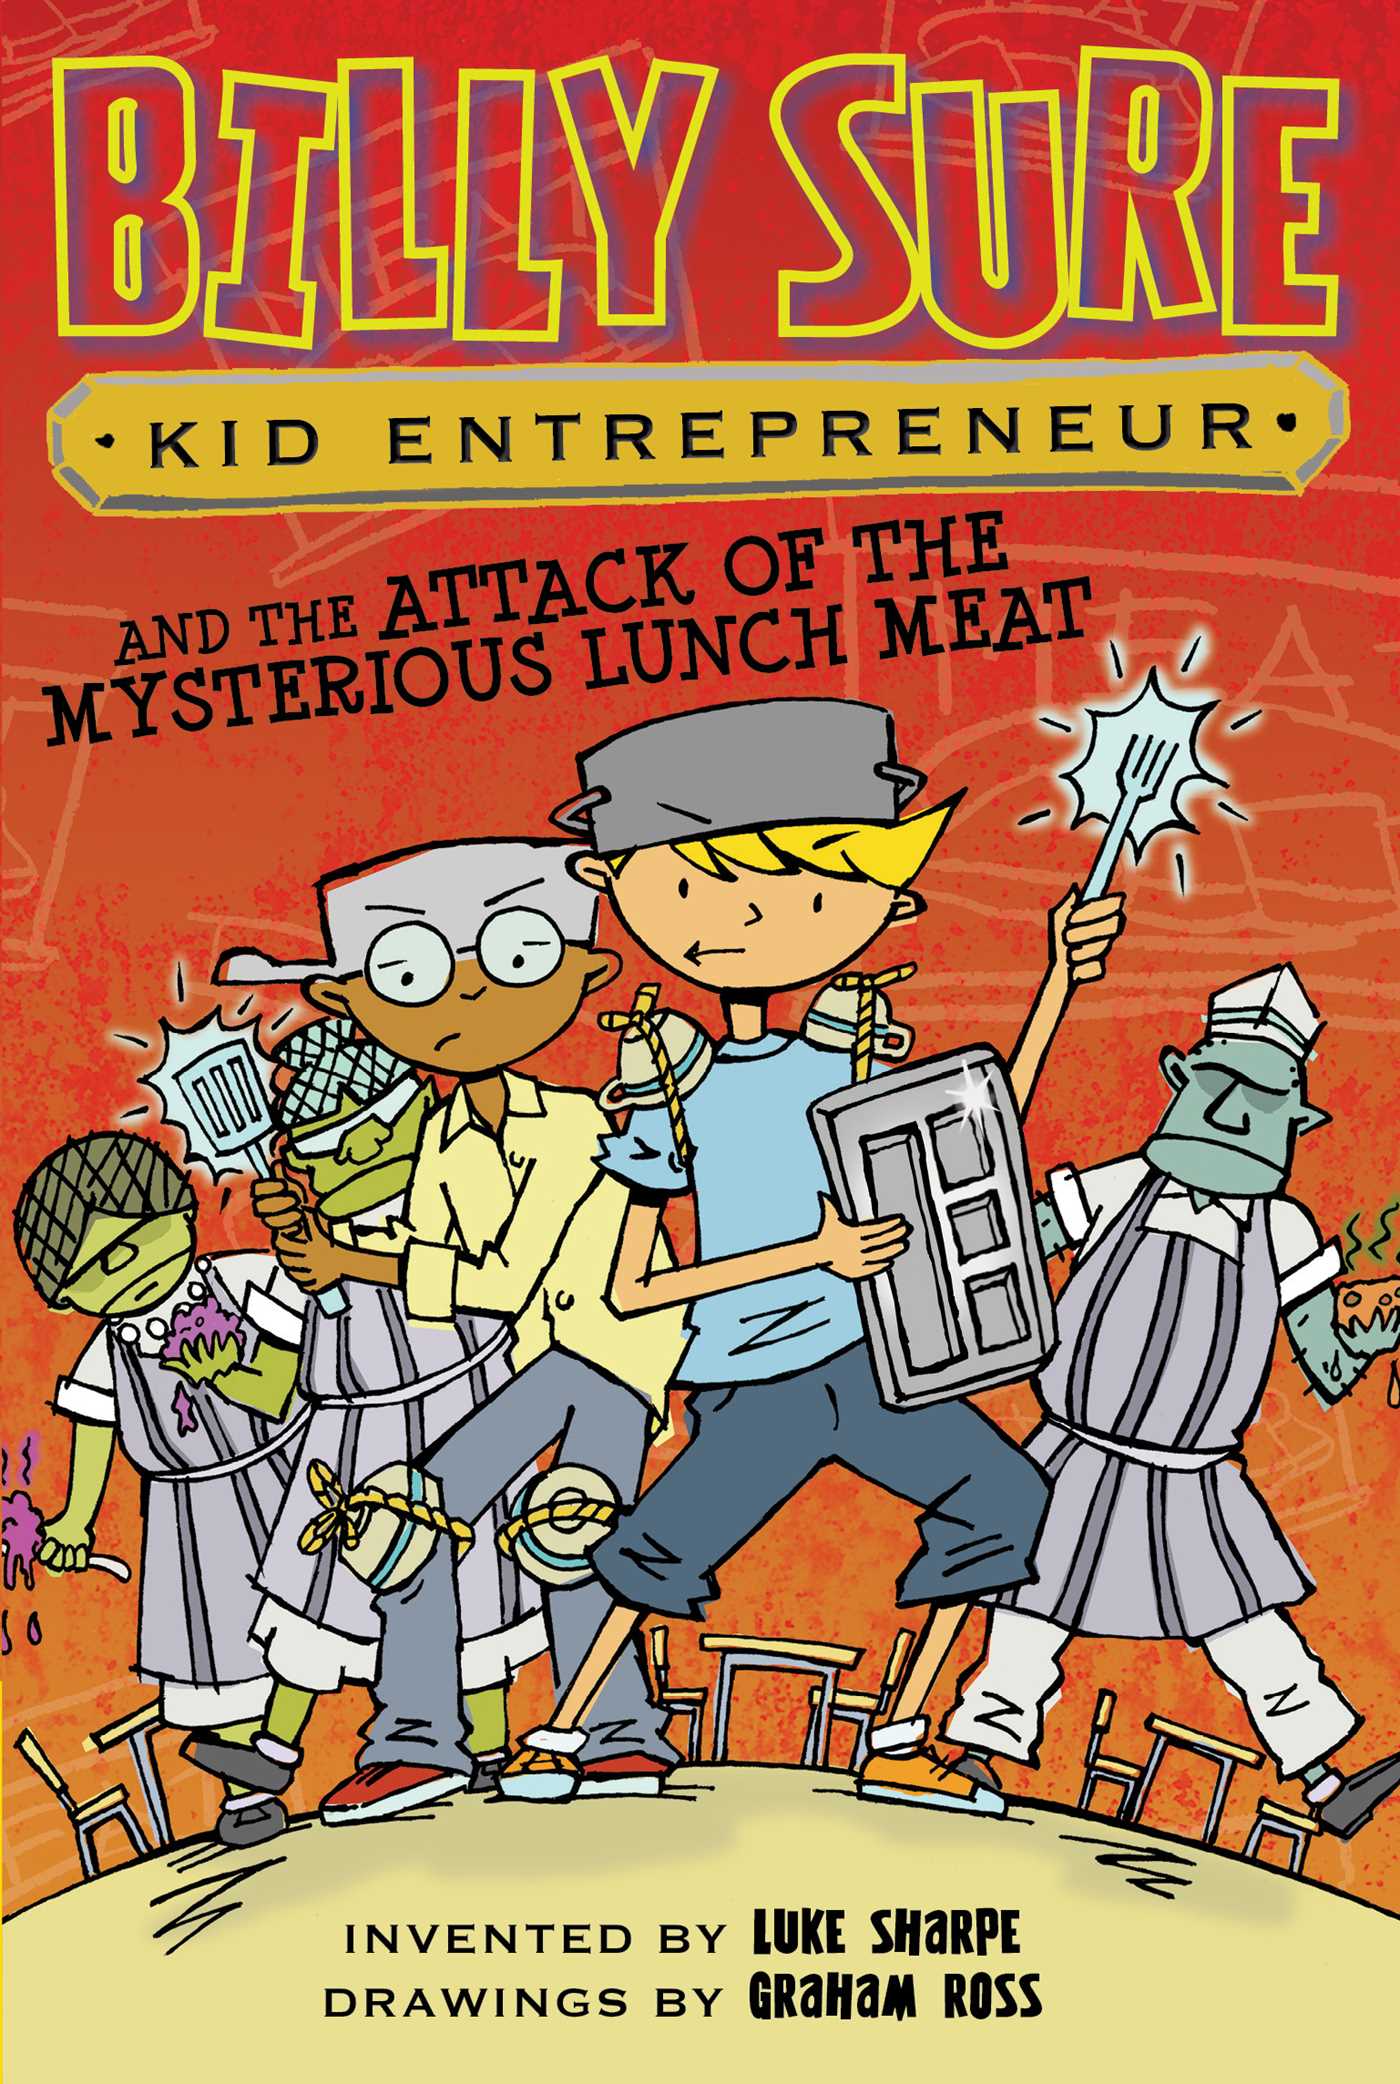 Billy Sure Kid Entrepreneur and the Attack of the Mysterious Lunch Meat | Sharpe, Luke